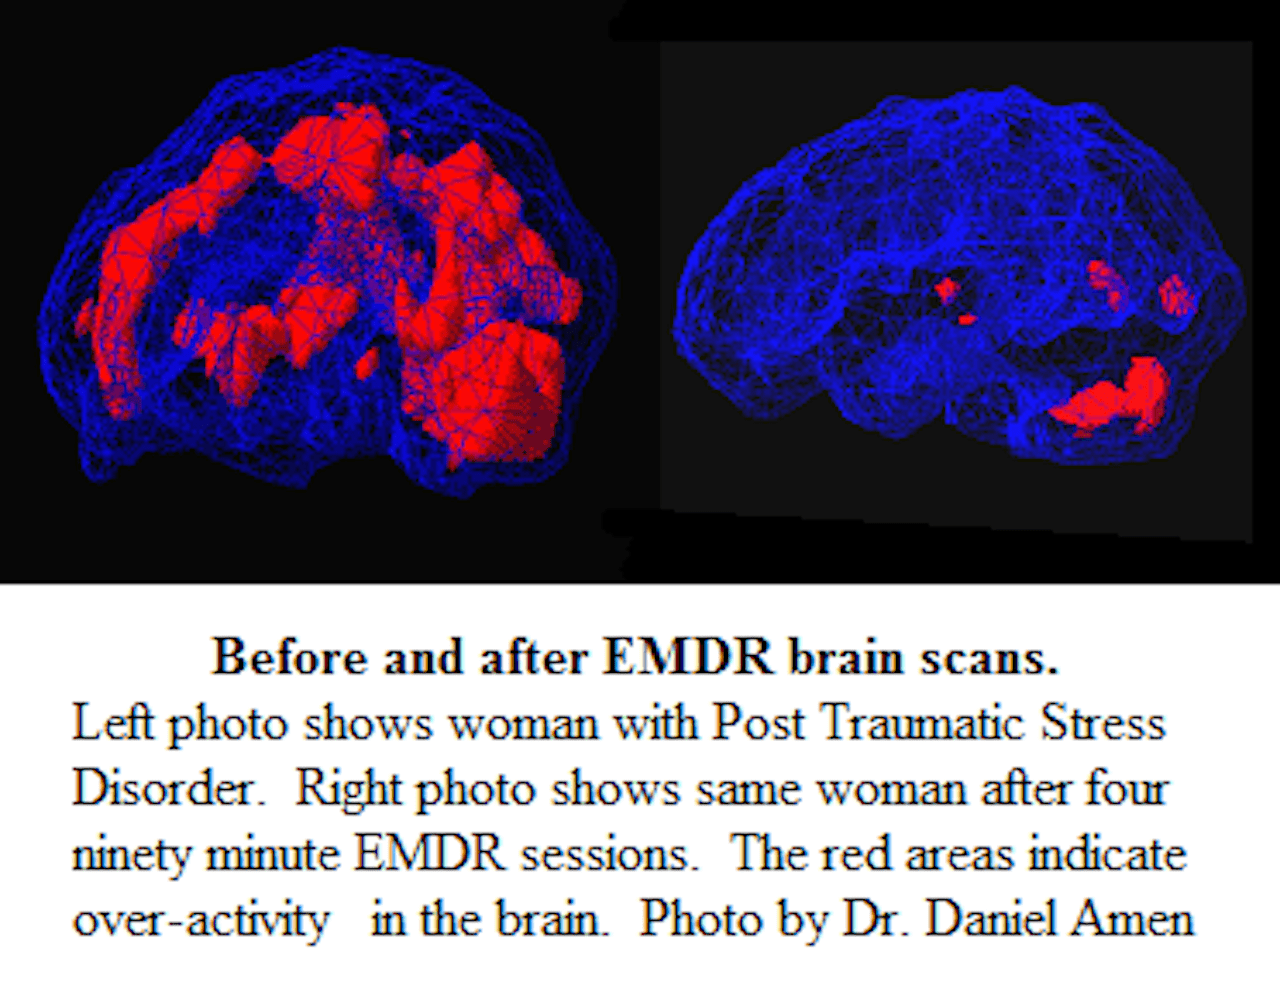 Side-by-side images depicting brain scans before and after EMDR therapy, illustrating neural changes and healing.